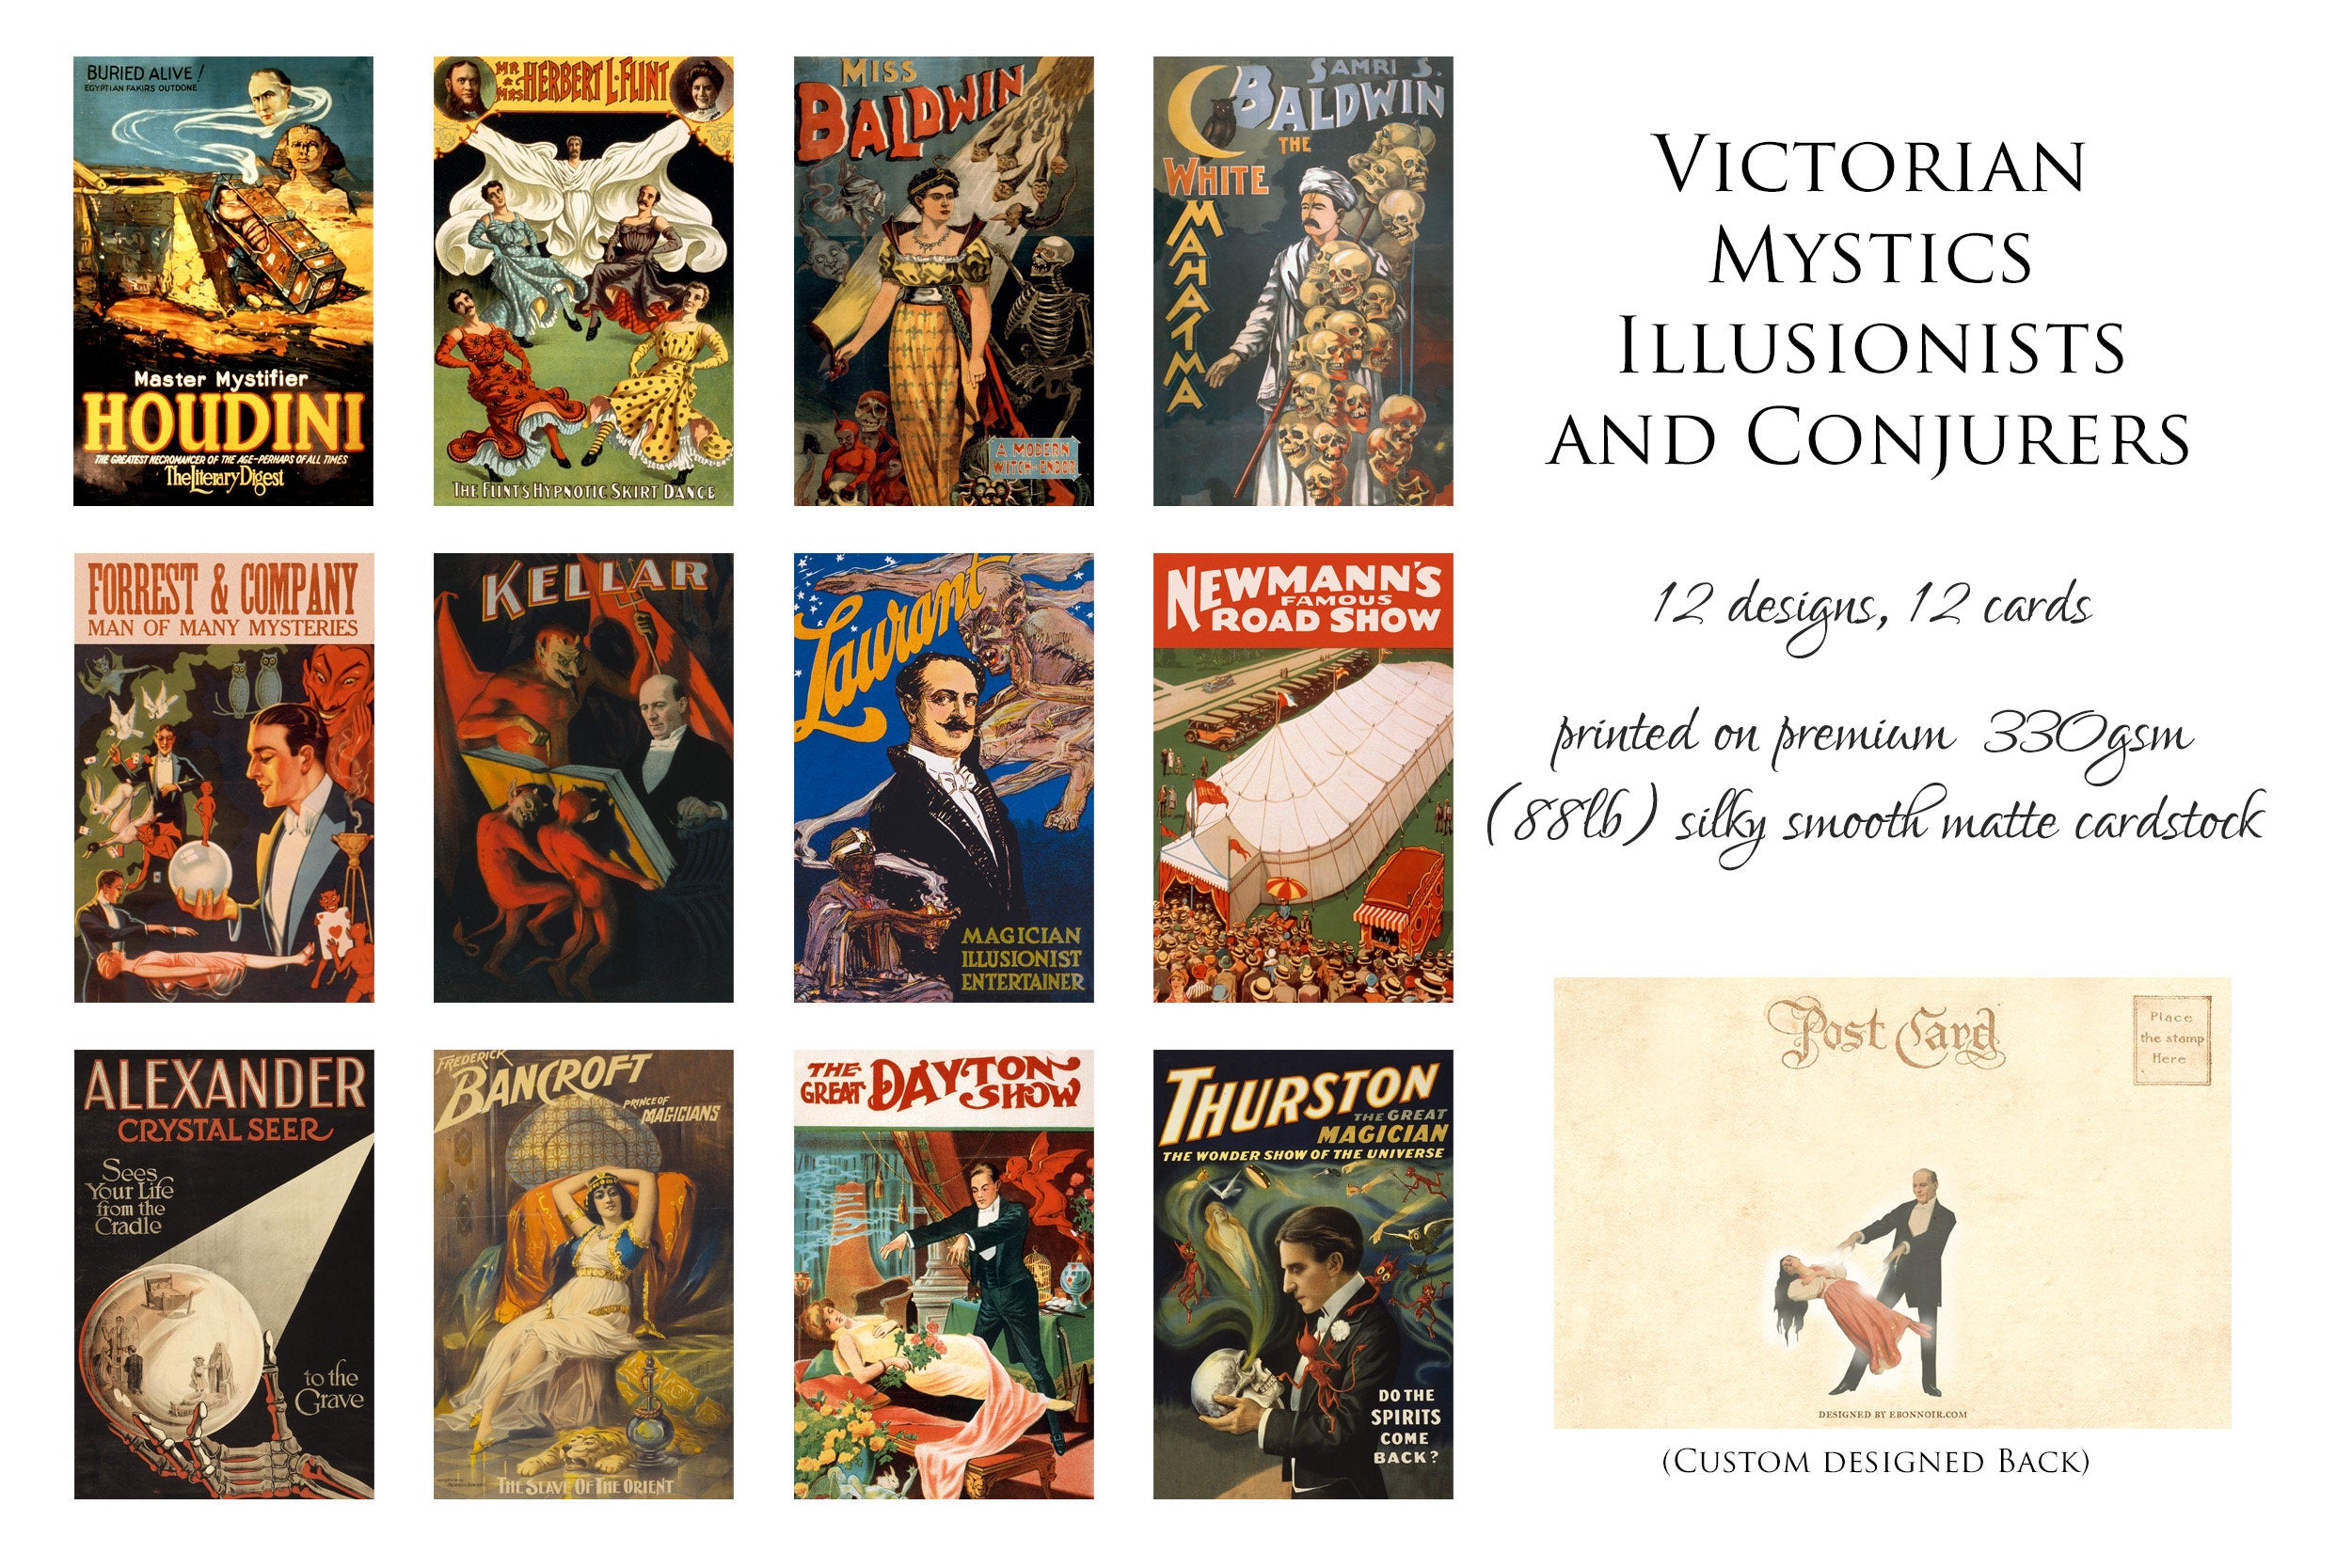 Victorian Mystics, Illusionists, and Conjurers Postcard/Greeting Card Set, Exclusively Designed, 12 Designs, 12 Cards